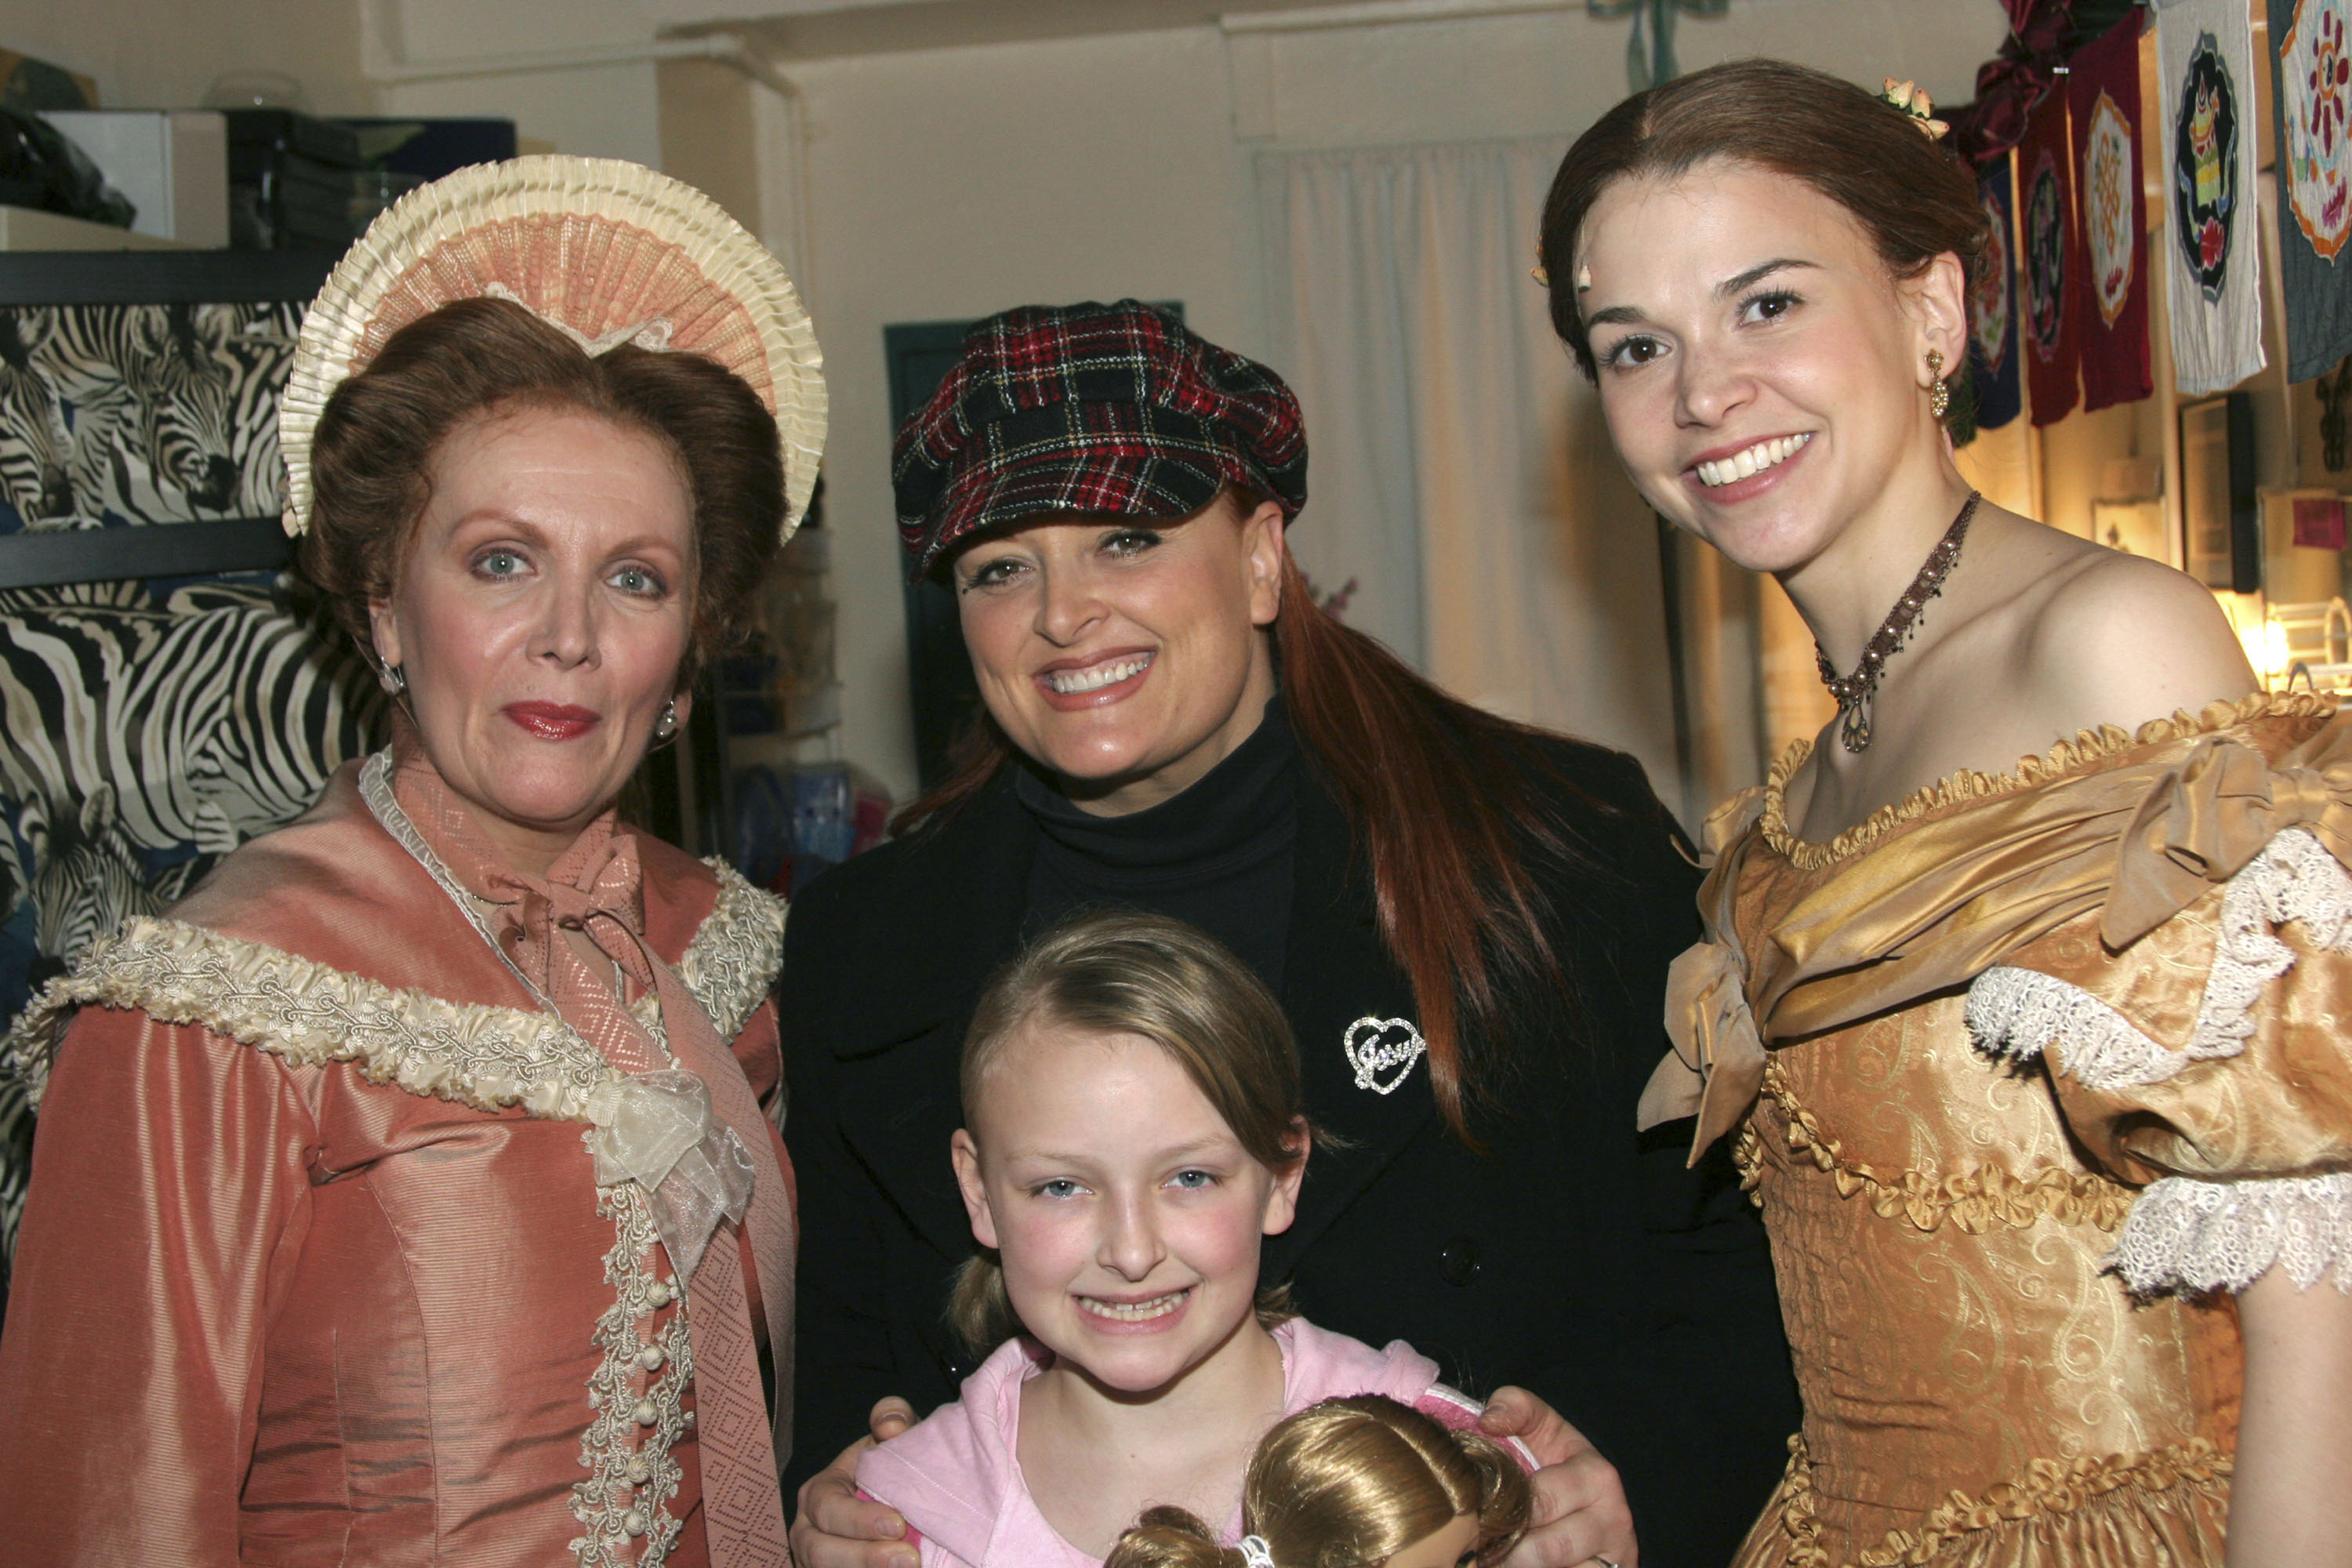 Maureen McGovern, Wynonna Judd, daughter Grace and Sutton Foster backstage at "Little Women" on Broadway, on March 23, 2005. | Source: Getty Images